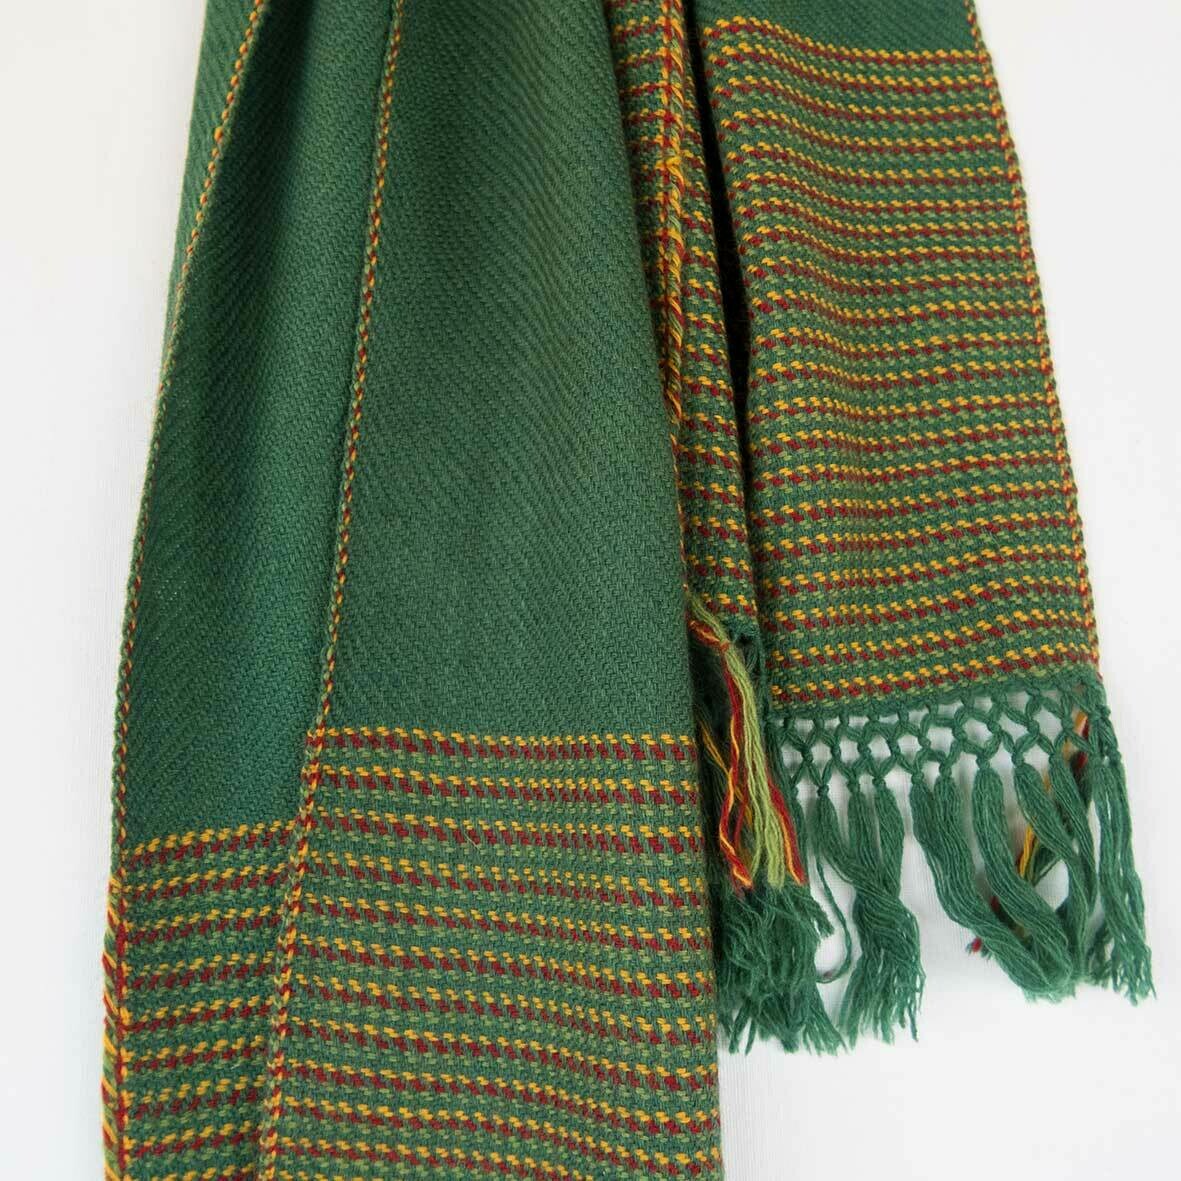 Hand-woven woollen scarf dyed with indigo, madder and tesu